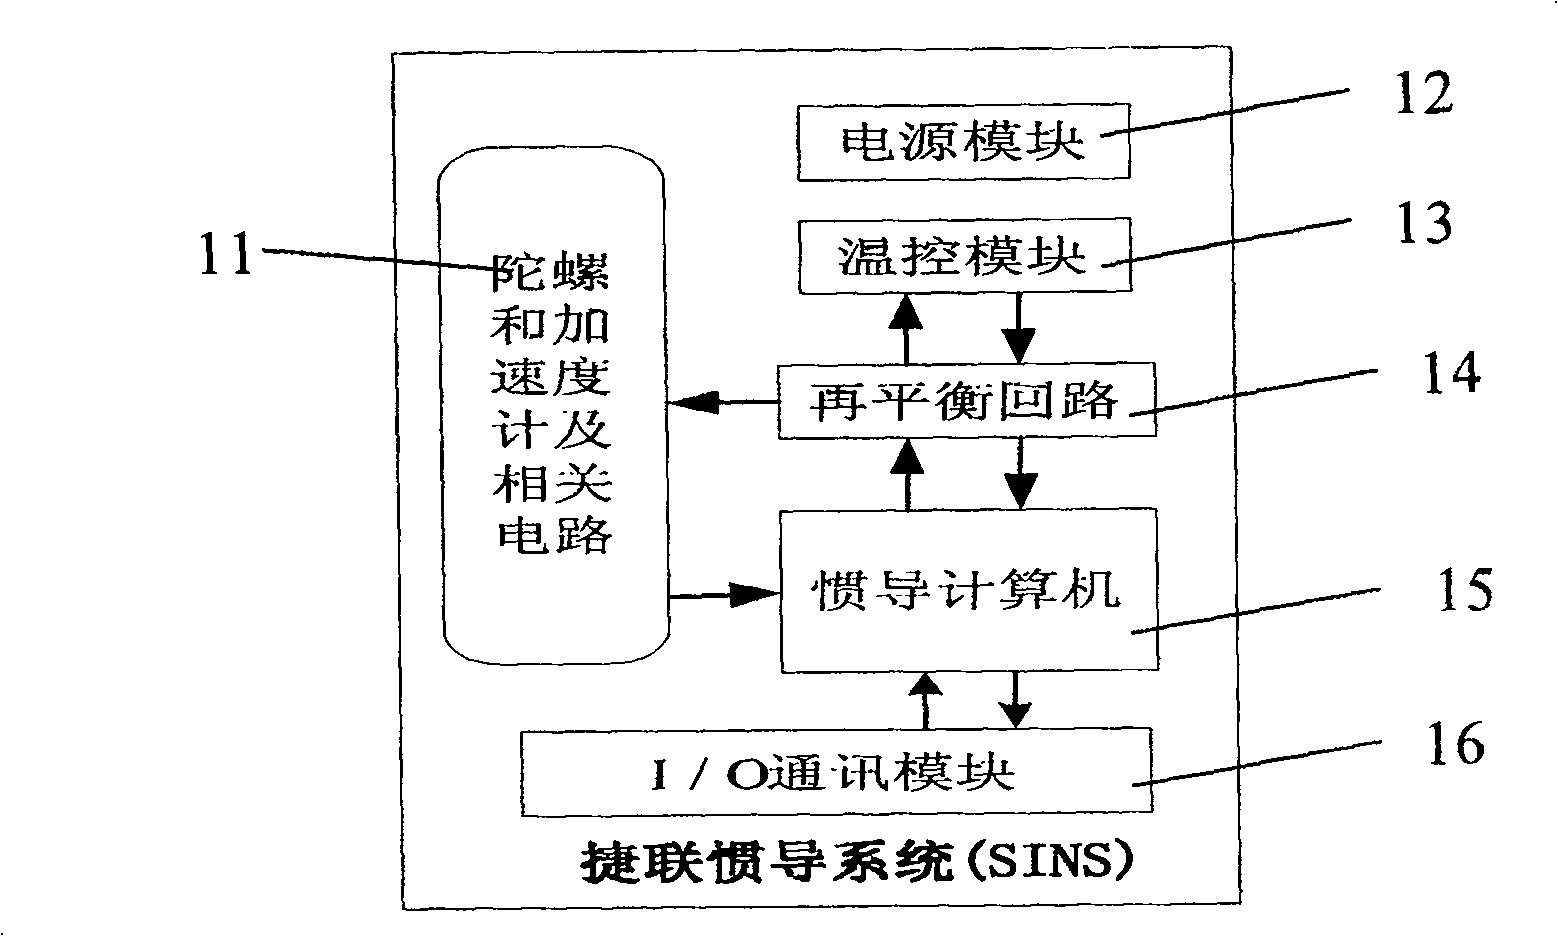 SINS/CNS/GPS Combined navigation semi-entity copying system